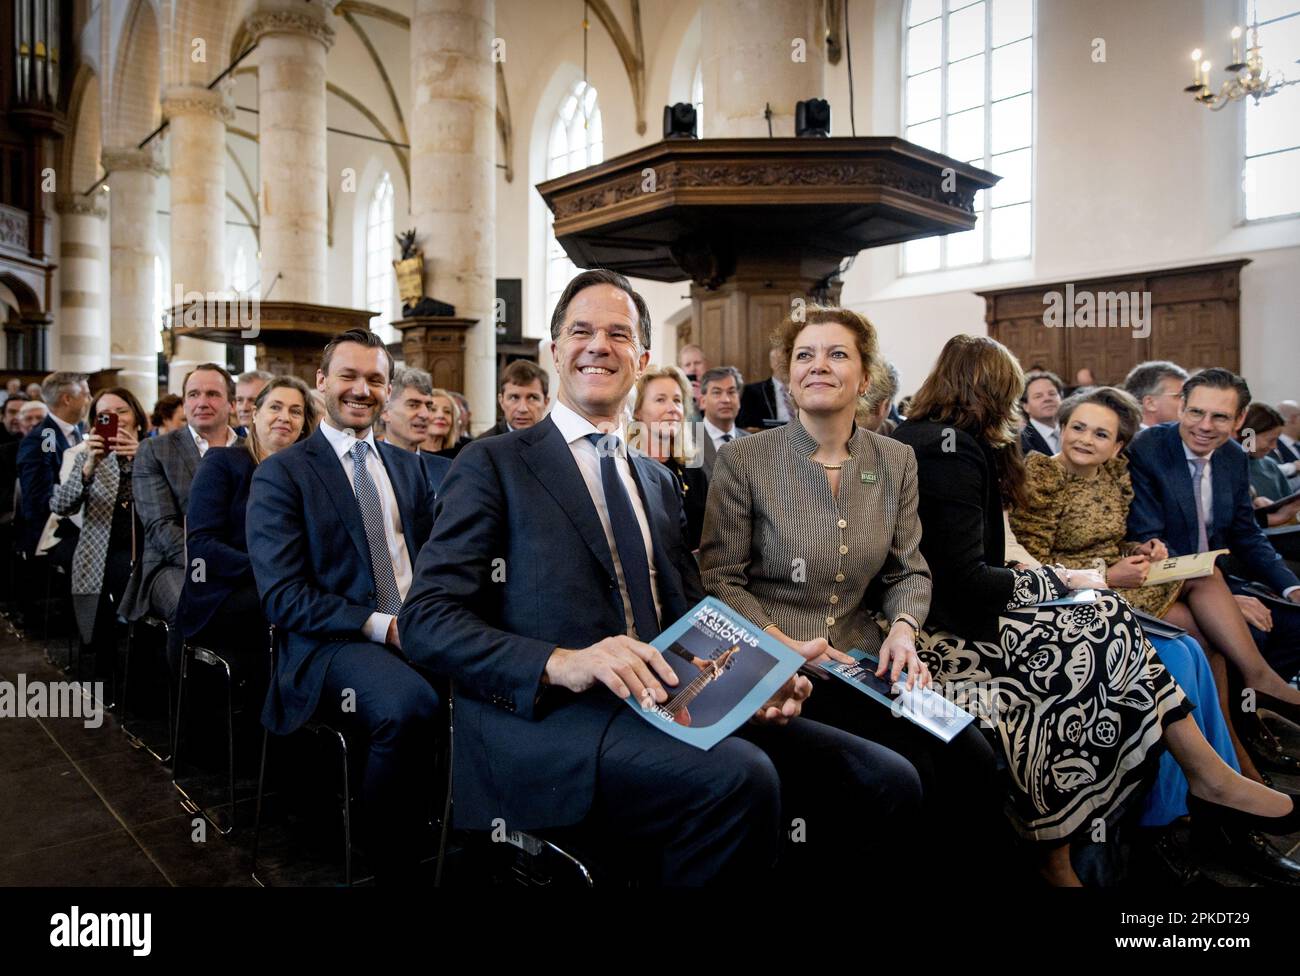 NAARDEN - Prime Minister Mark Rutte and Alexandra van Huffelen (R), State  Secretary for Kingdom Relations and Digitization prior to the traditional  performance by the Netherlands Bach Society of Bach's Matthew Passion